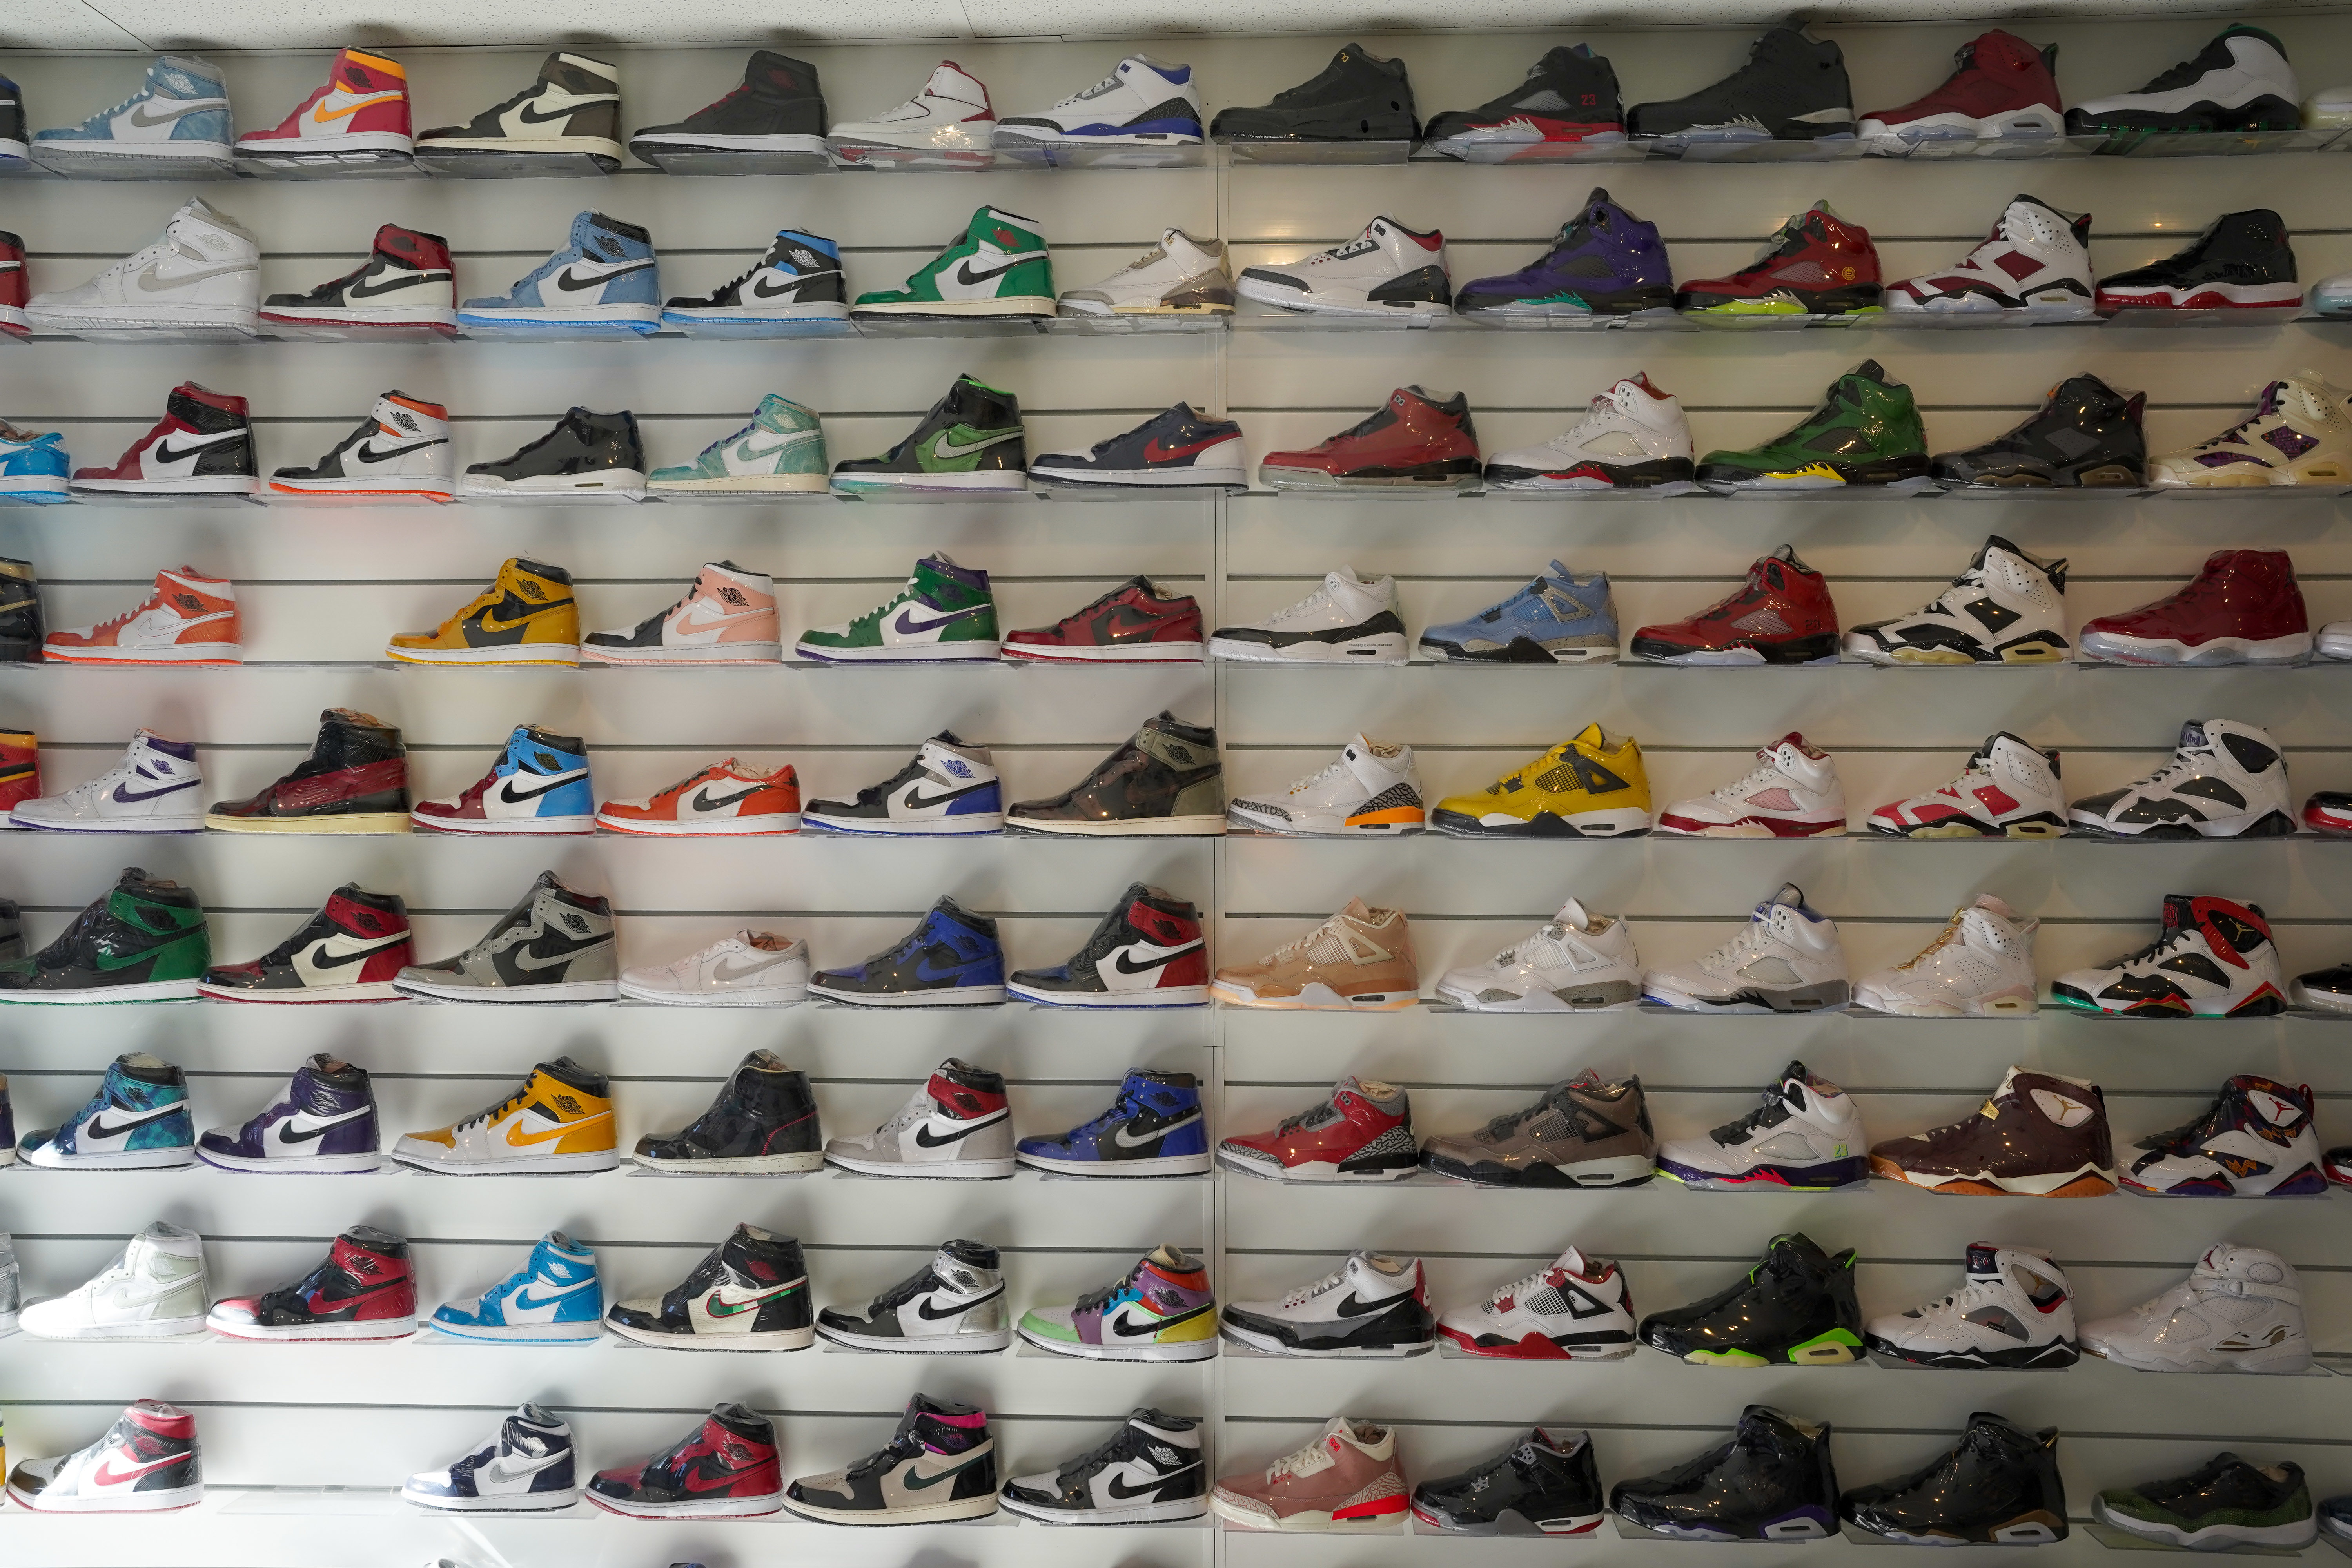 I'm a sneaker geek — resell these 10 pairs to make a fortune